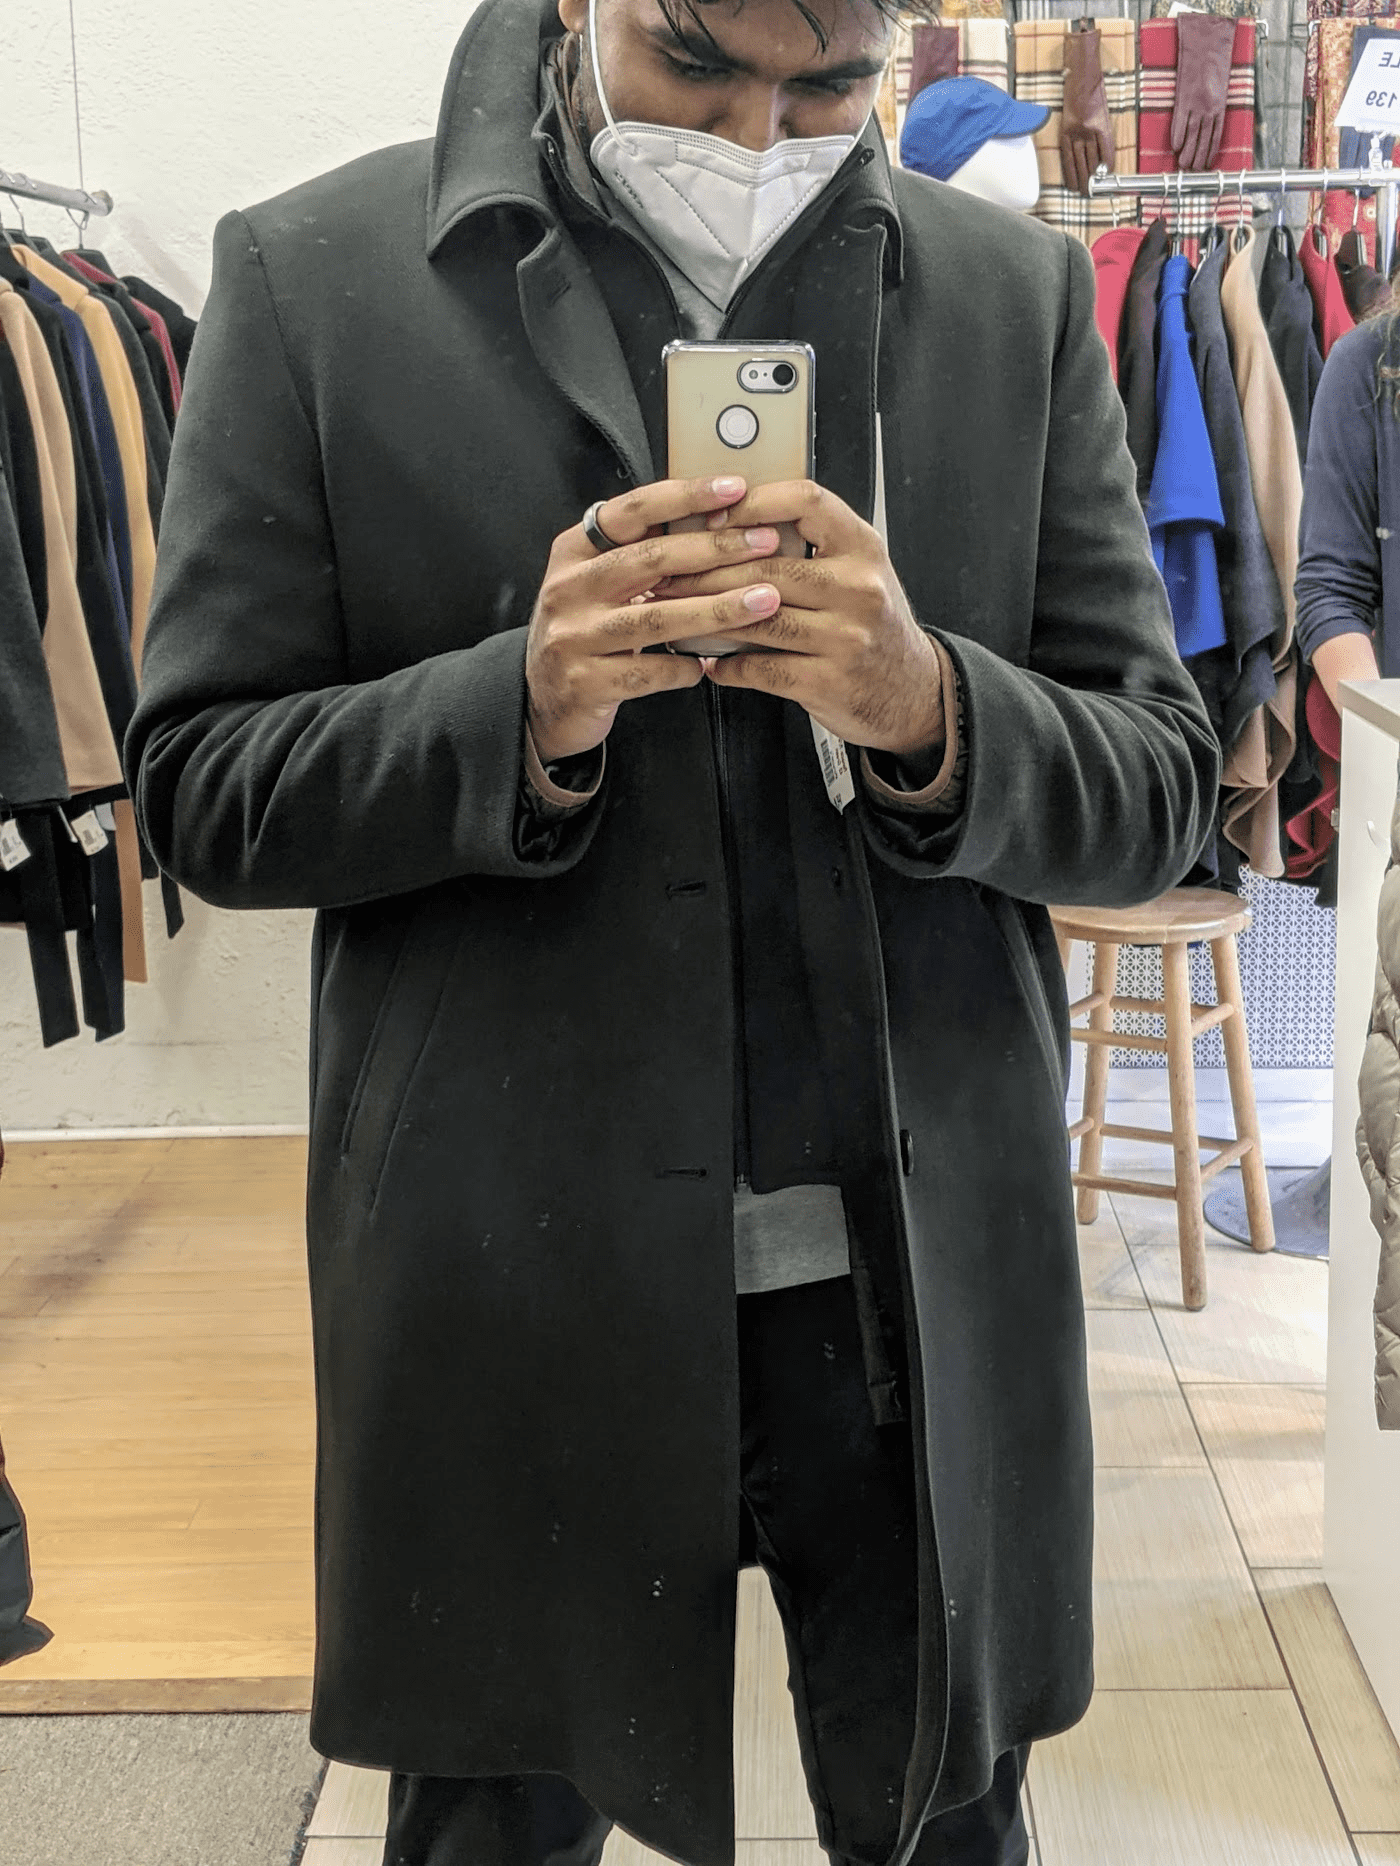 Mirror selfie at Lorne's Coats in my new coat! Don't worry, I'm wearing a mask!